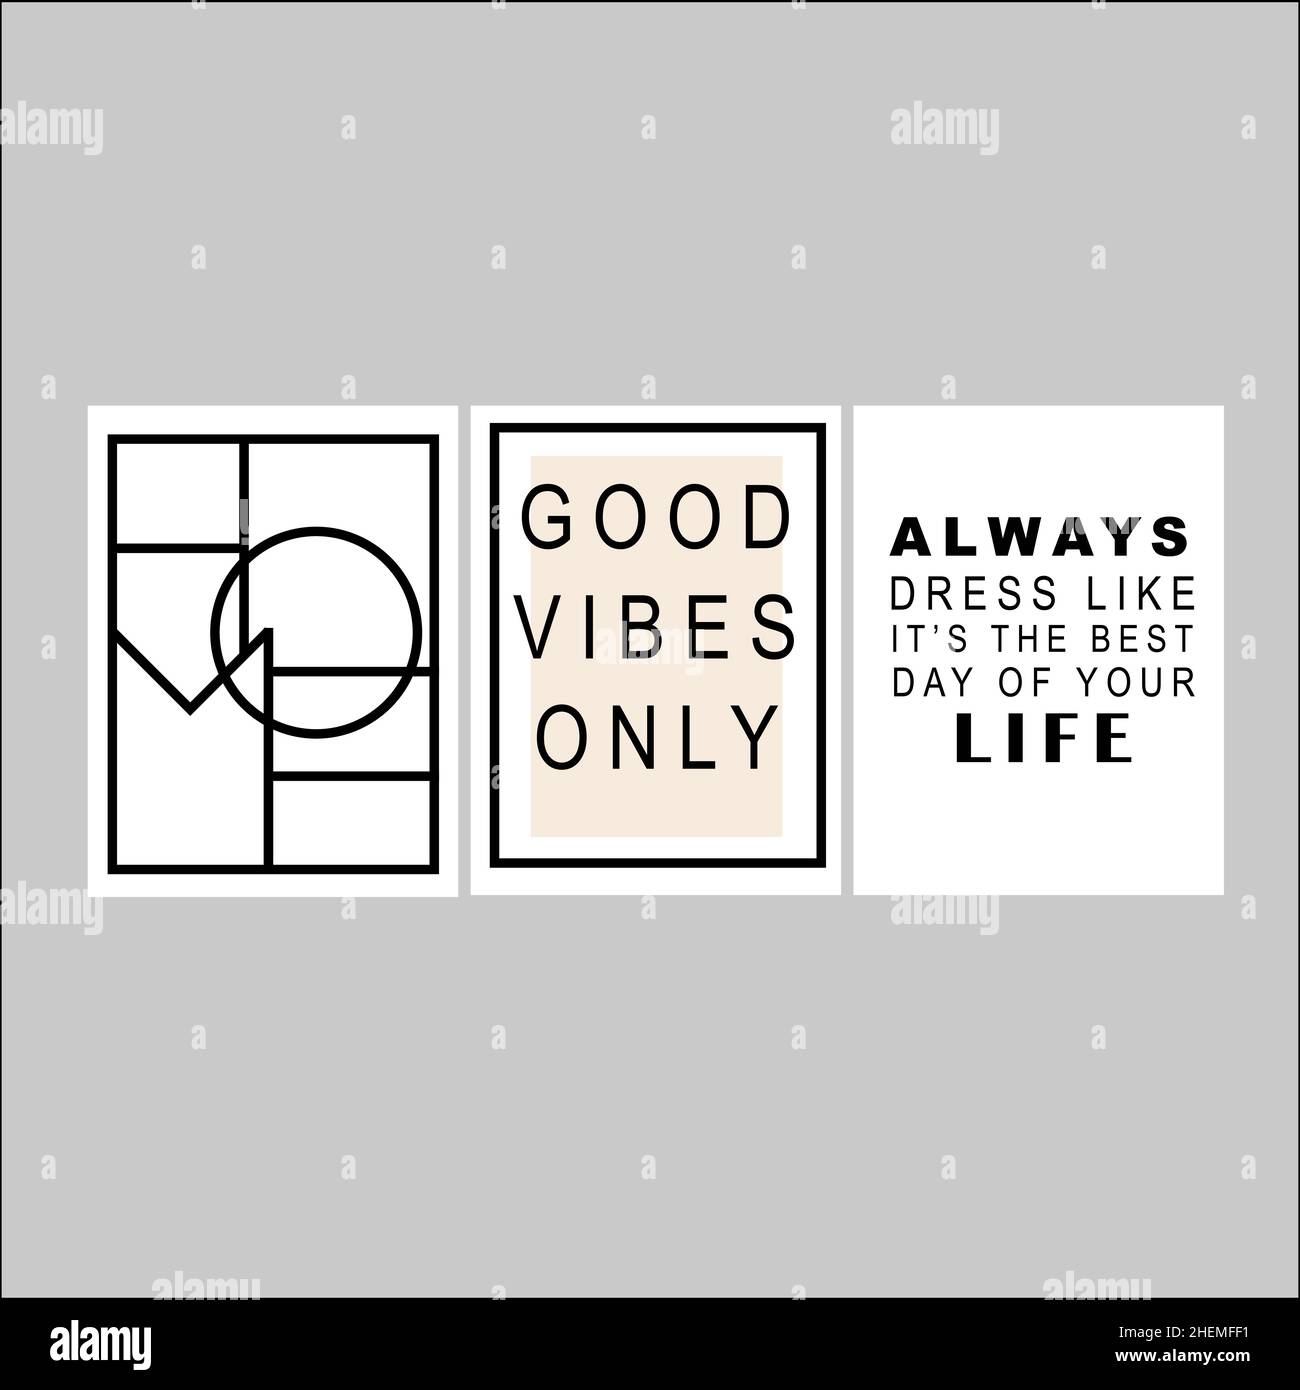 Home. Good vibes only. Always dress like it's the best day of your life. Vector illustration lettering poster. Stock Vector